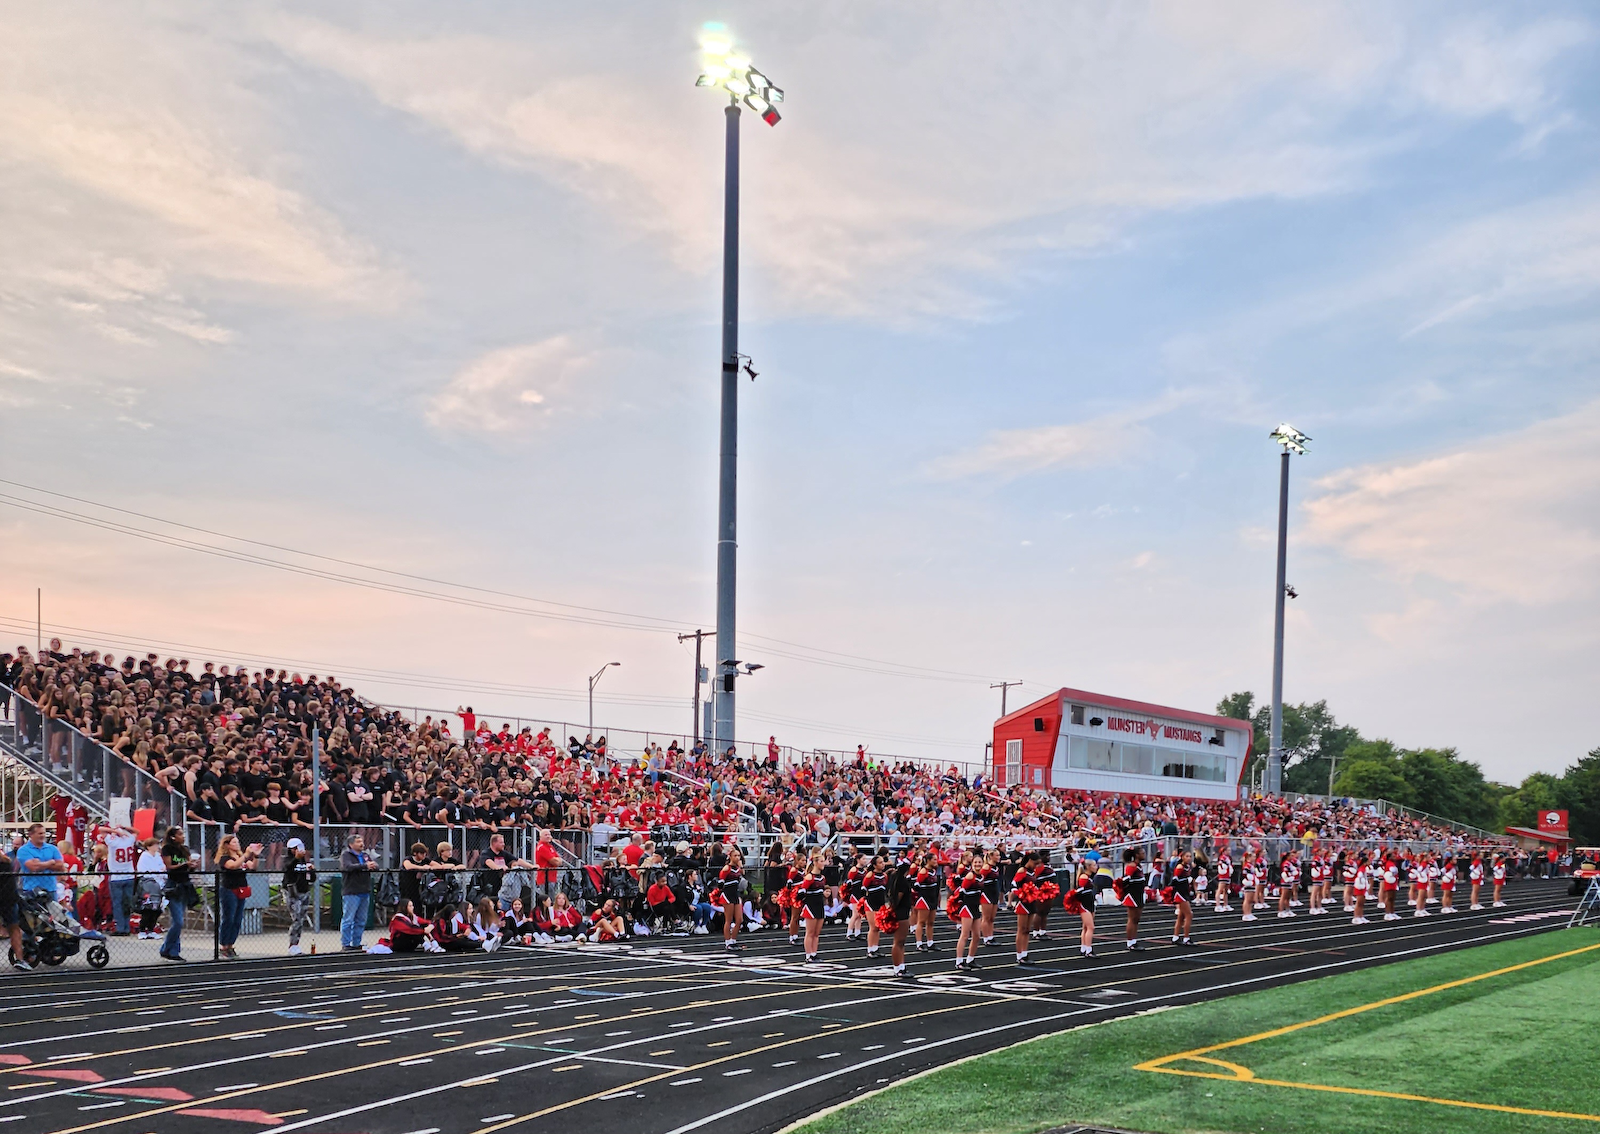 Munster vs. Lake Central Football gallery cover photo